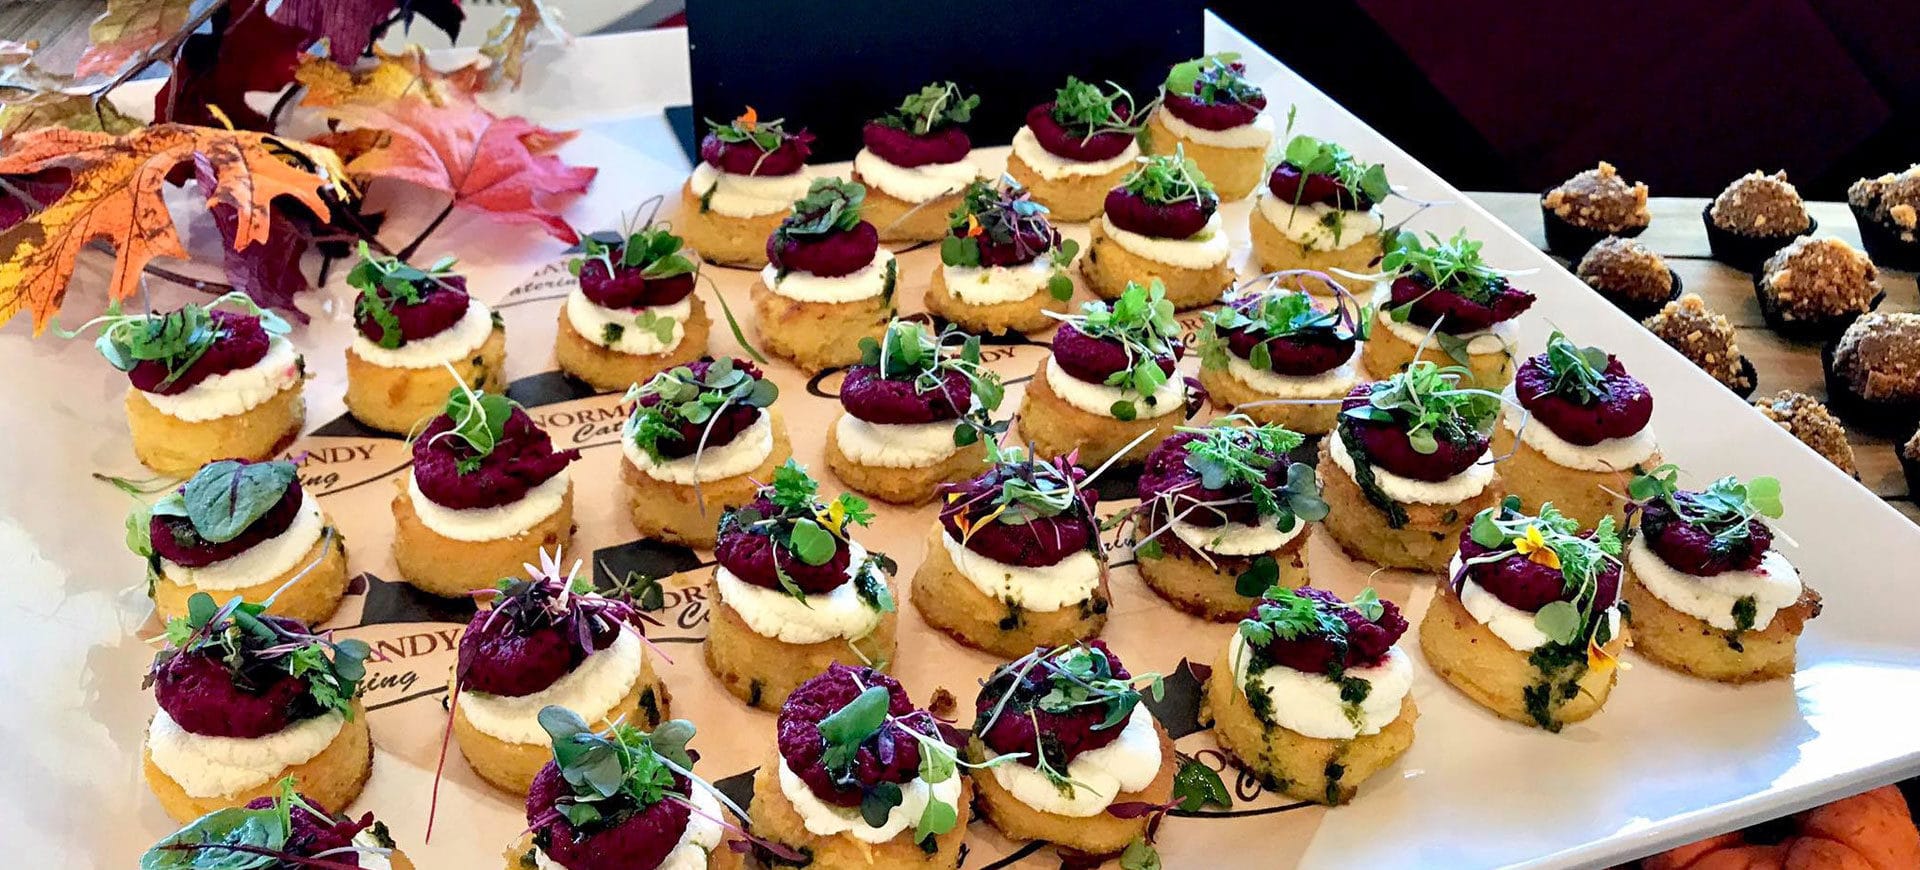 Polenta Pancake (roasted beet hummus & honey goat cheese) by Normandy Catering